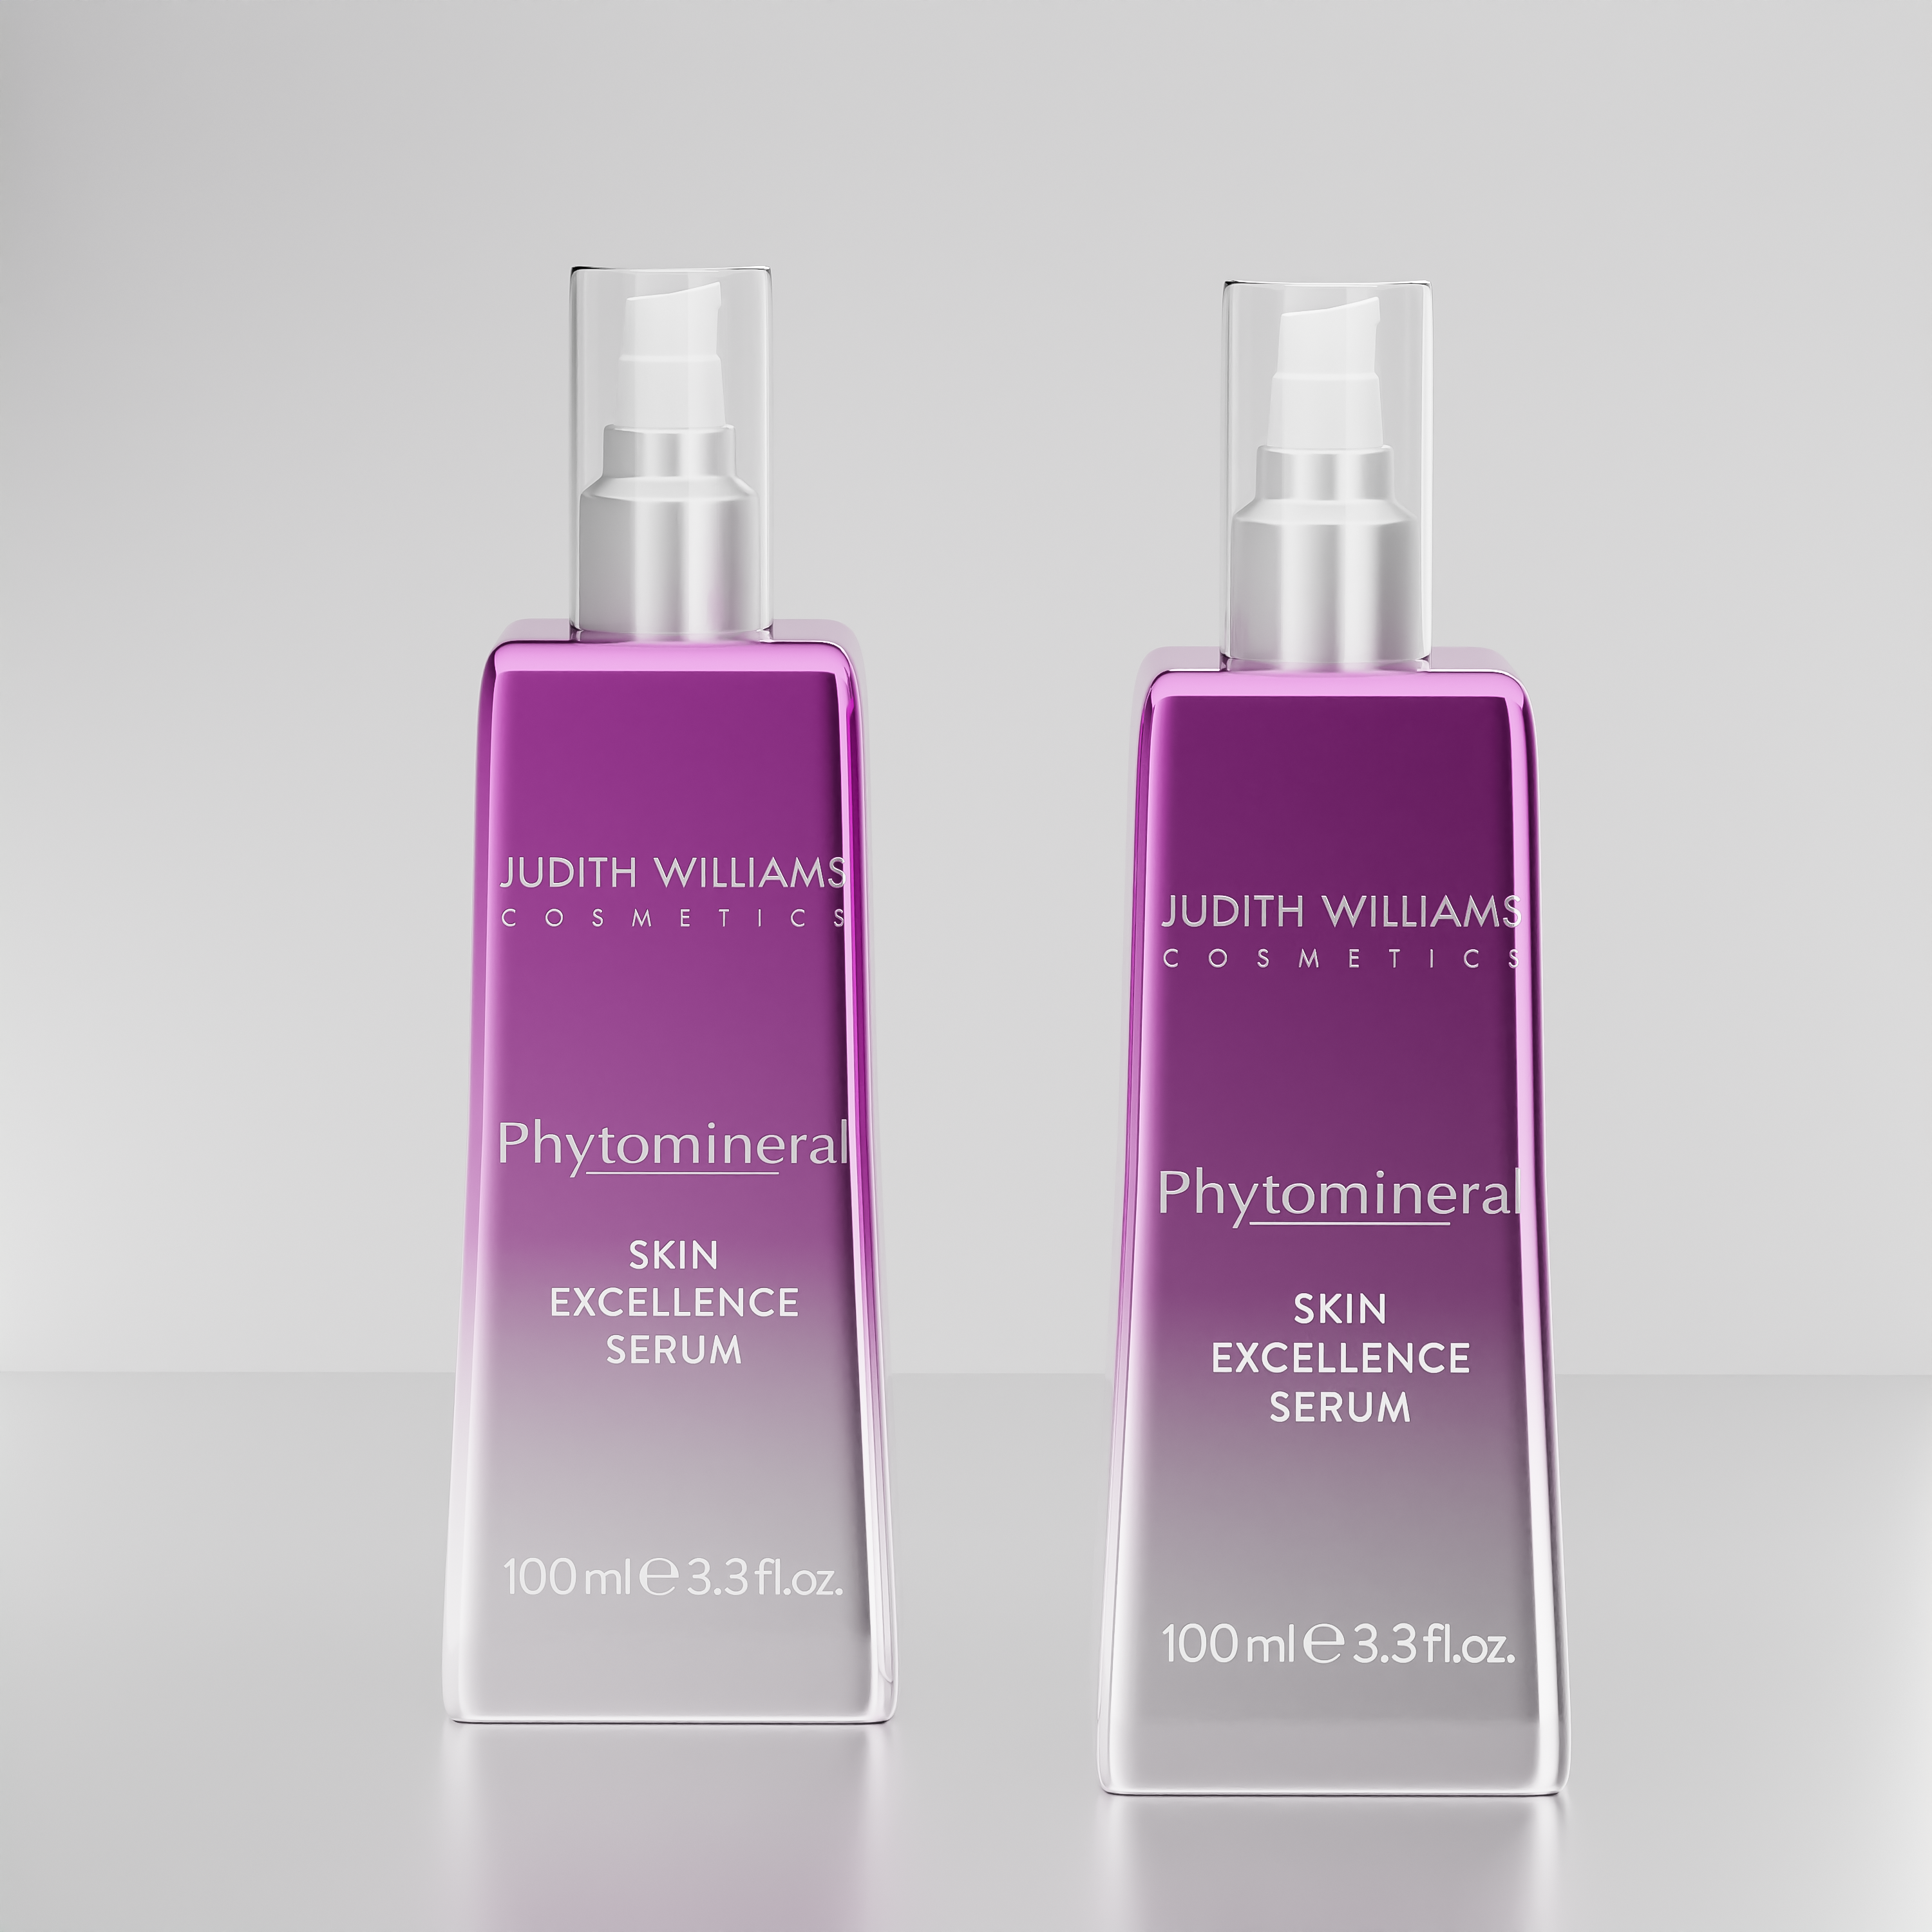 Phytomineral Skin Excellence Serum DUO